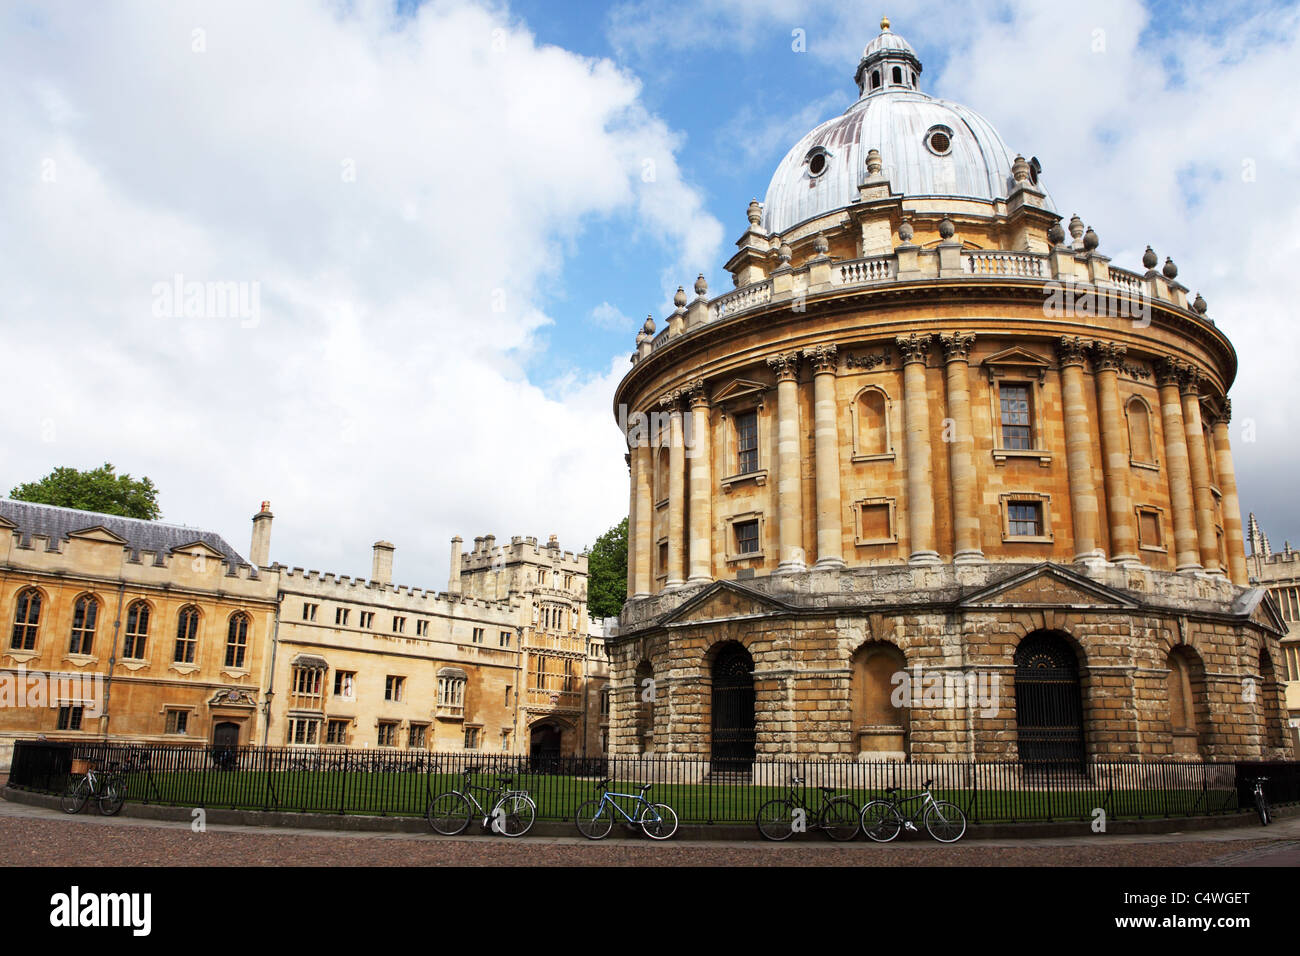 Bicycles are chained to the railings of the Radcliffe Camera on Radcliffe Square in Oxford, England. Stock Photo